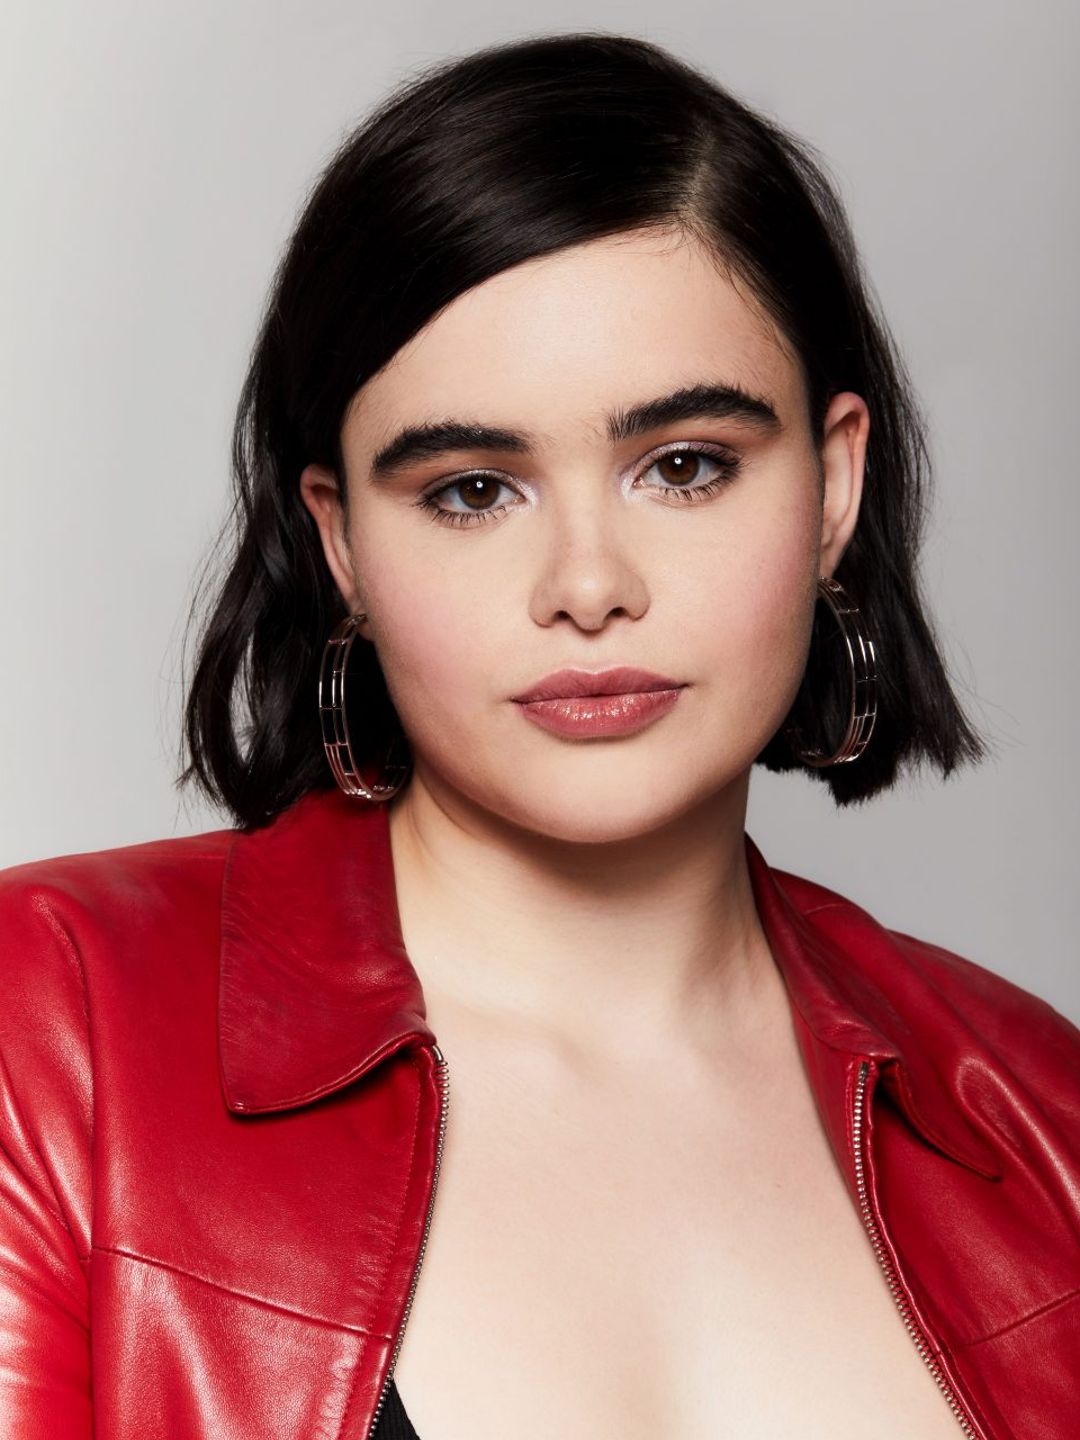 Barbie Ferreira who is her mother